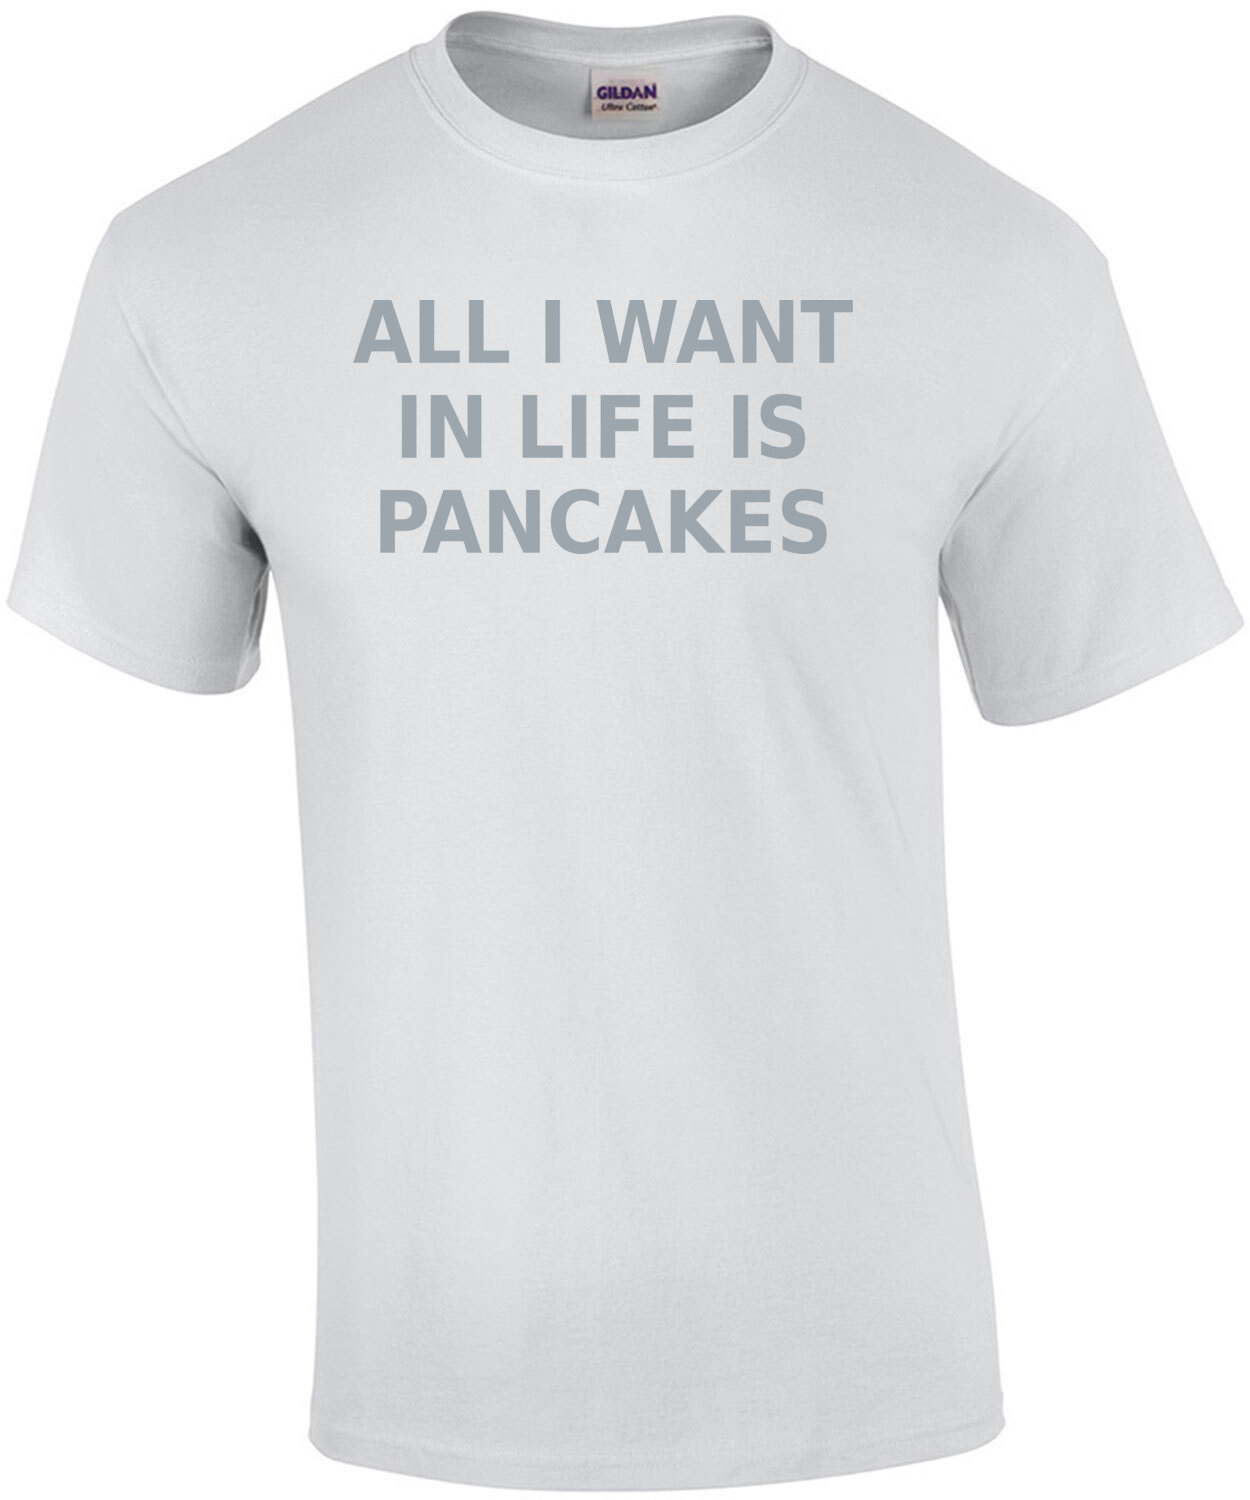 All I want in life is pancakes - funny t-shirt